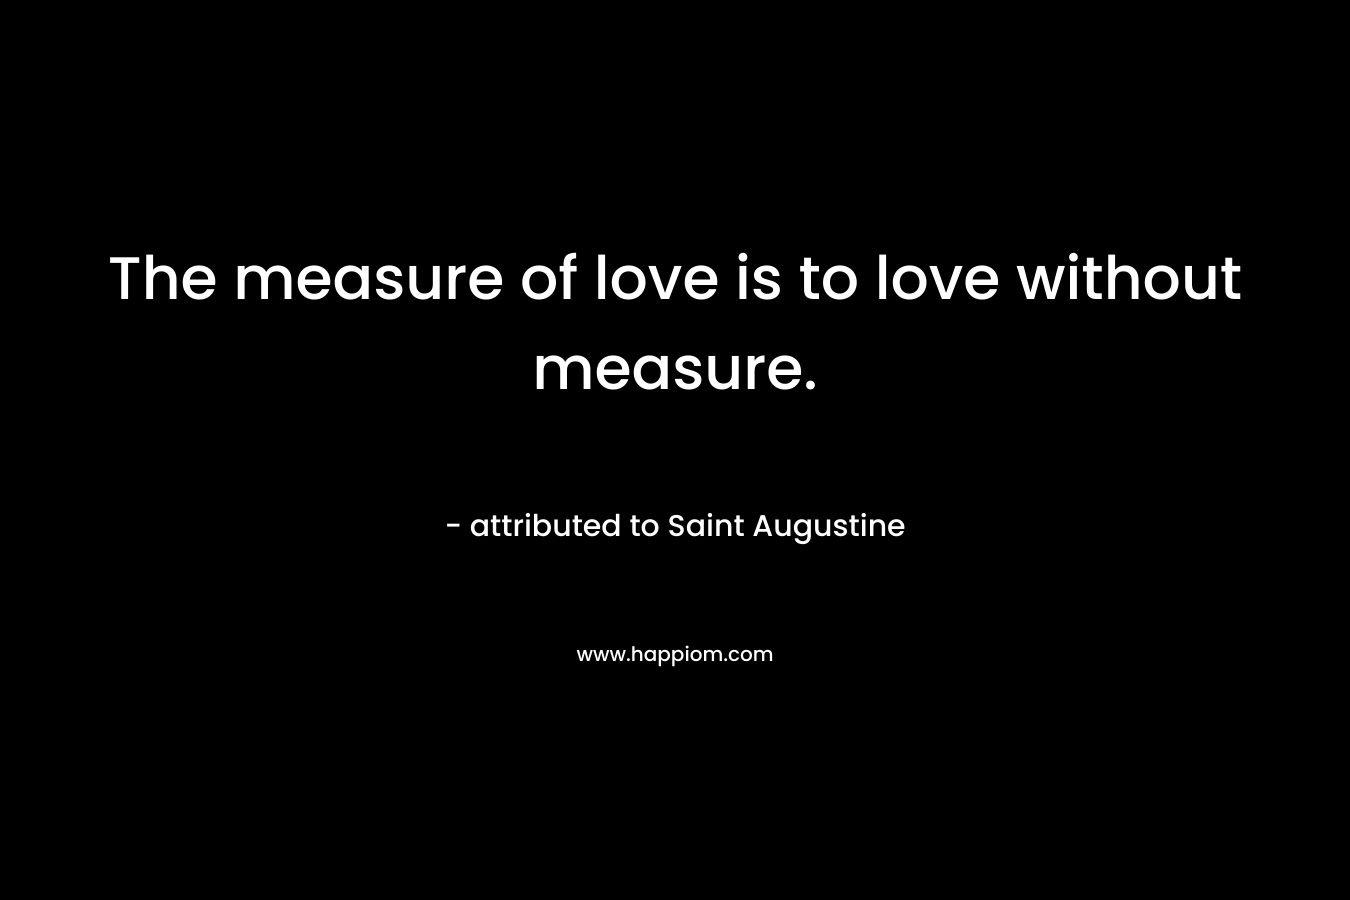 The measure of love is to love without measure.